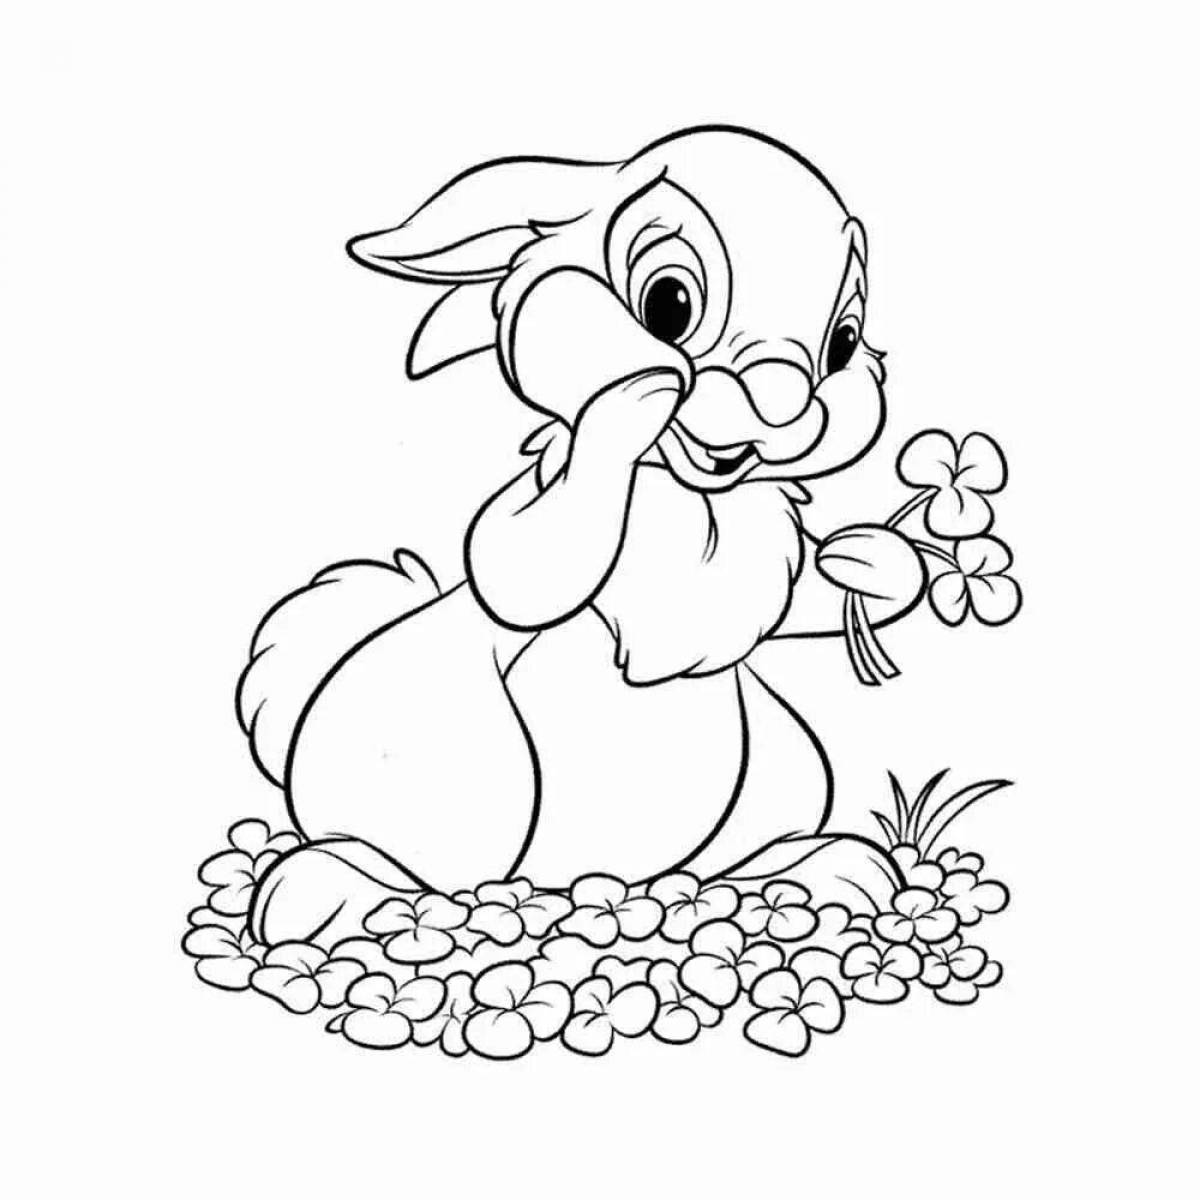 Bright coloring picture of a rabbit